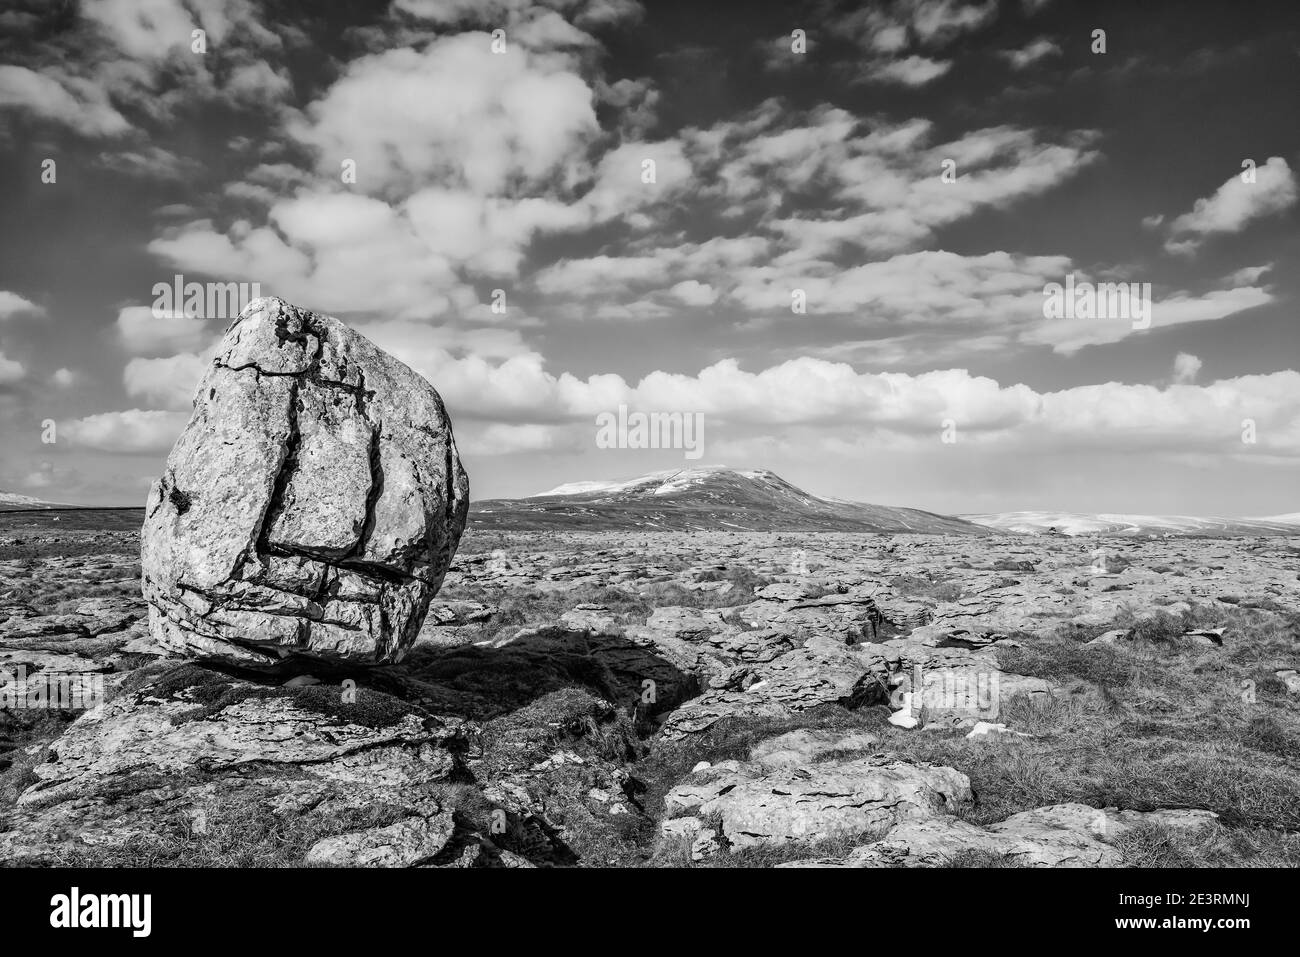 Fabulous winter scenery in monochrome of Whernside, the highest of the famous Yorkshire Dales Three Peaks; as seen from Twistleton Scales Moor with the largest of the limestone erratic boulders left over as a parting gift from the ice-age. Stock Photo